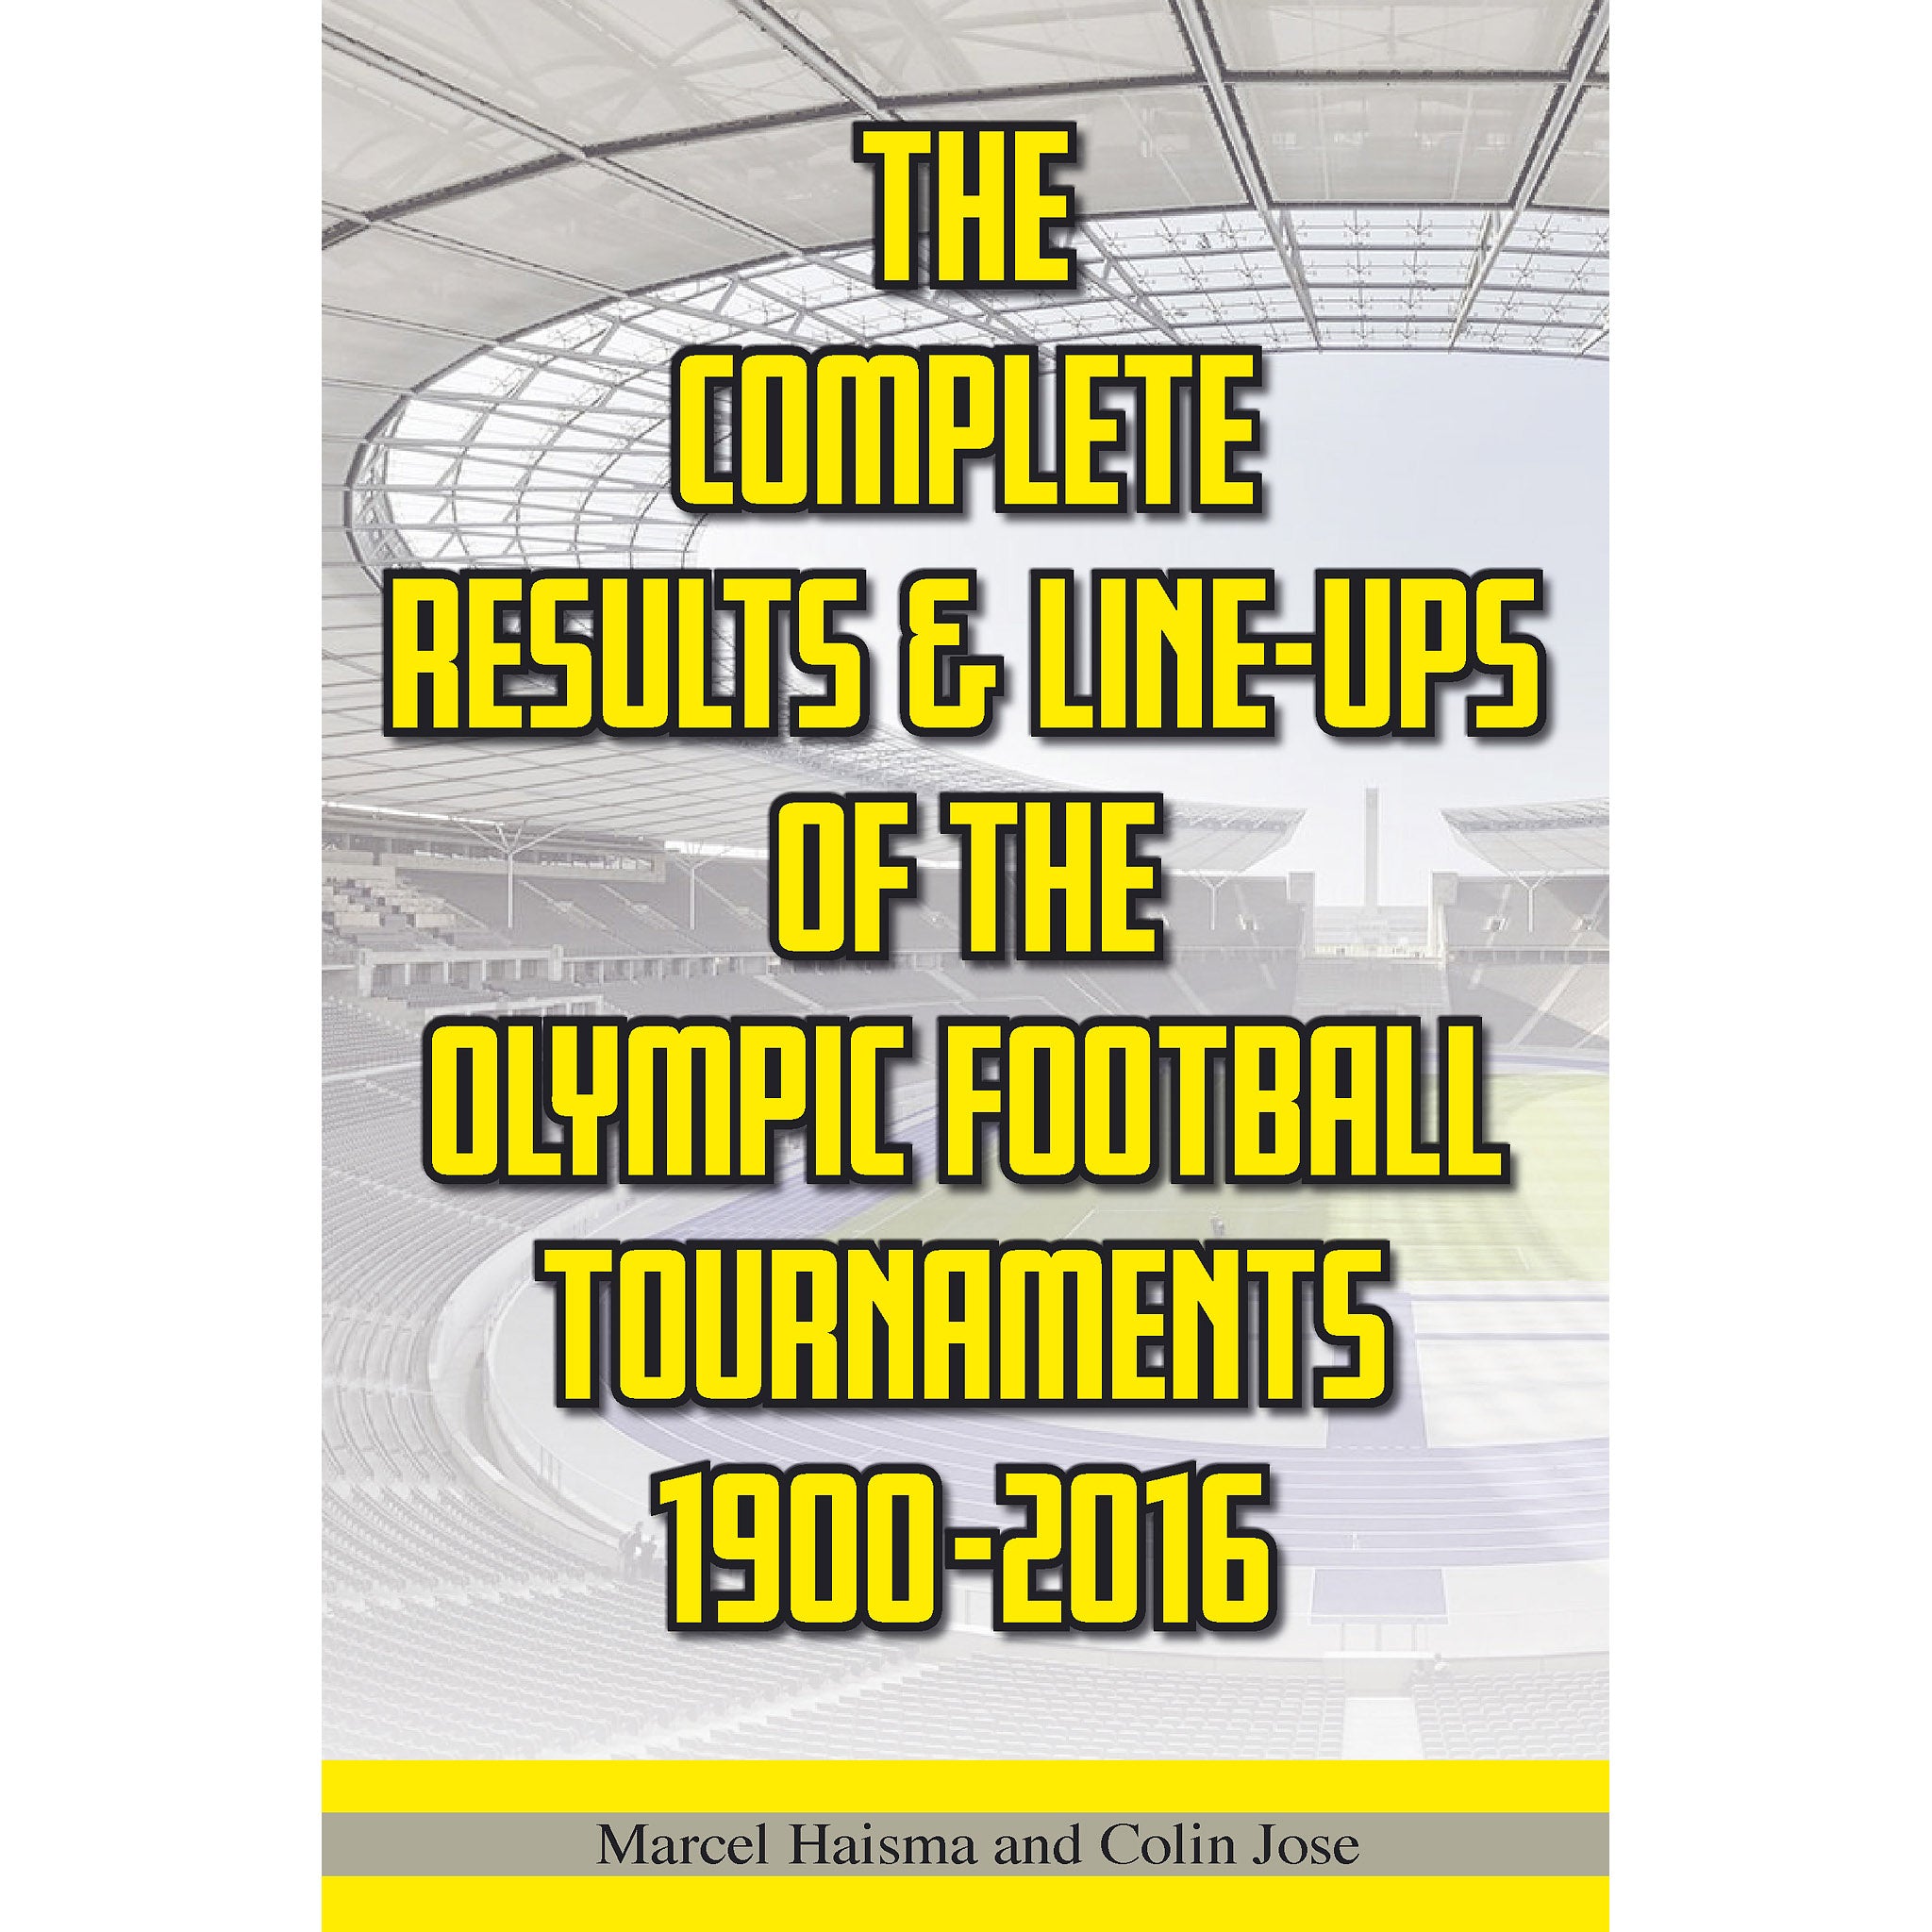 The Complete Results & Line-ups of the Olympic Football Tournaments 1900-2016